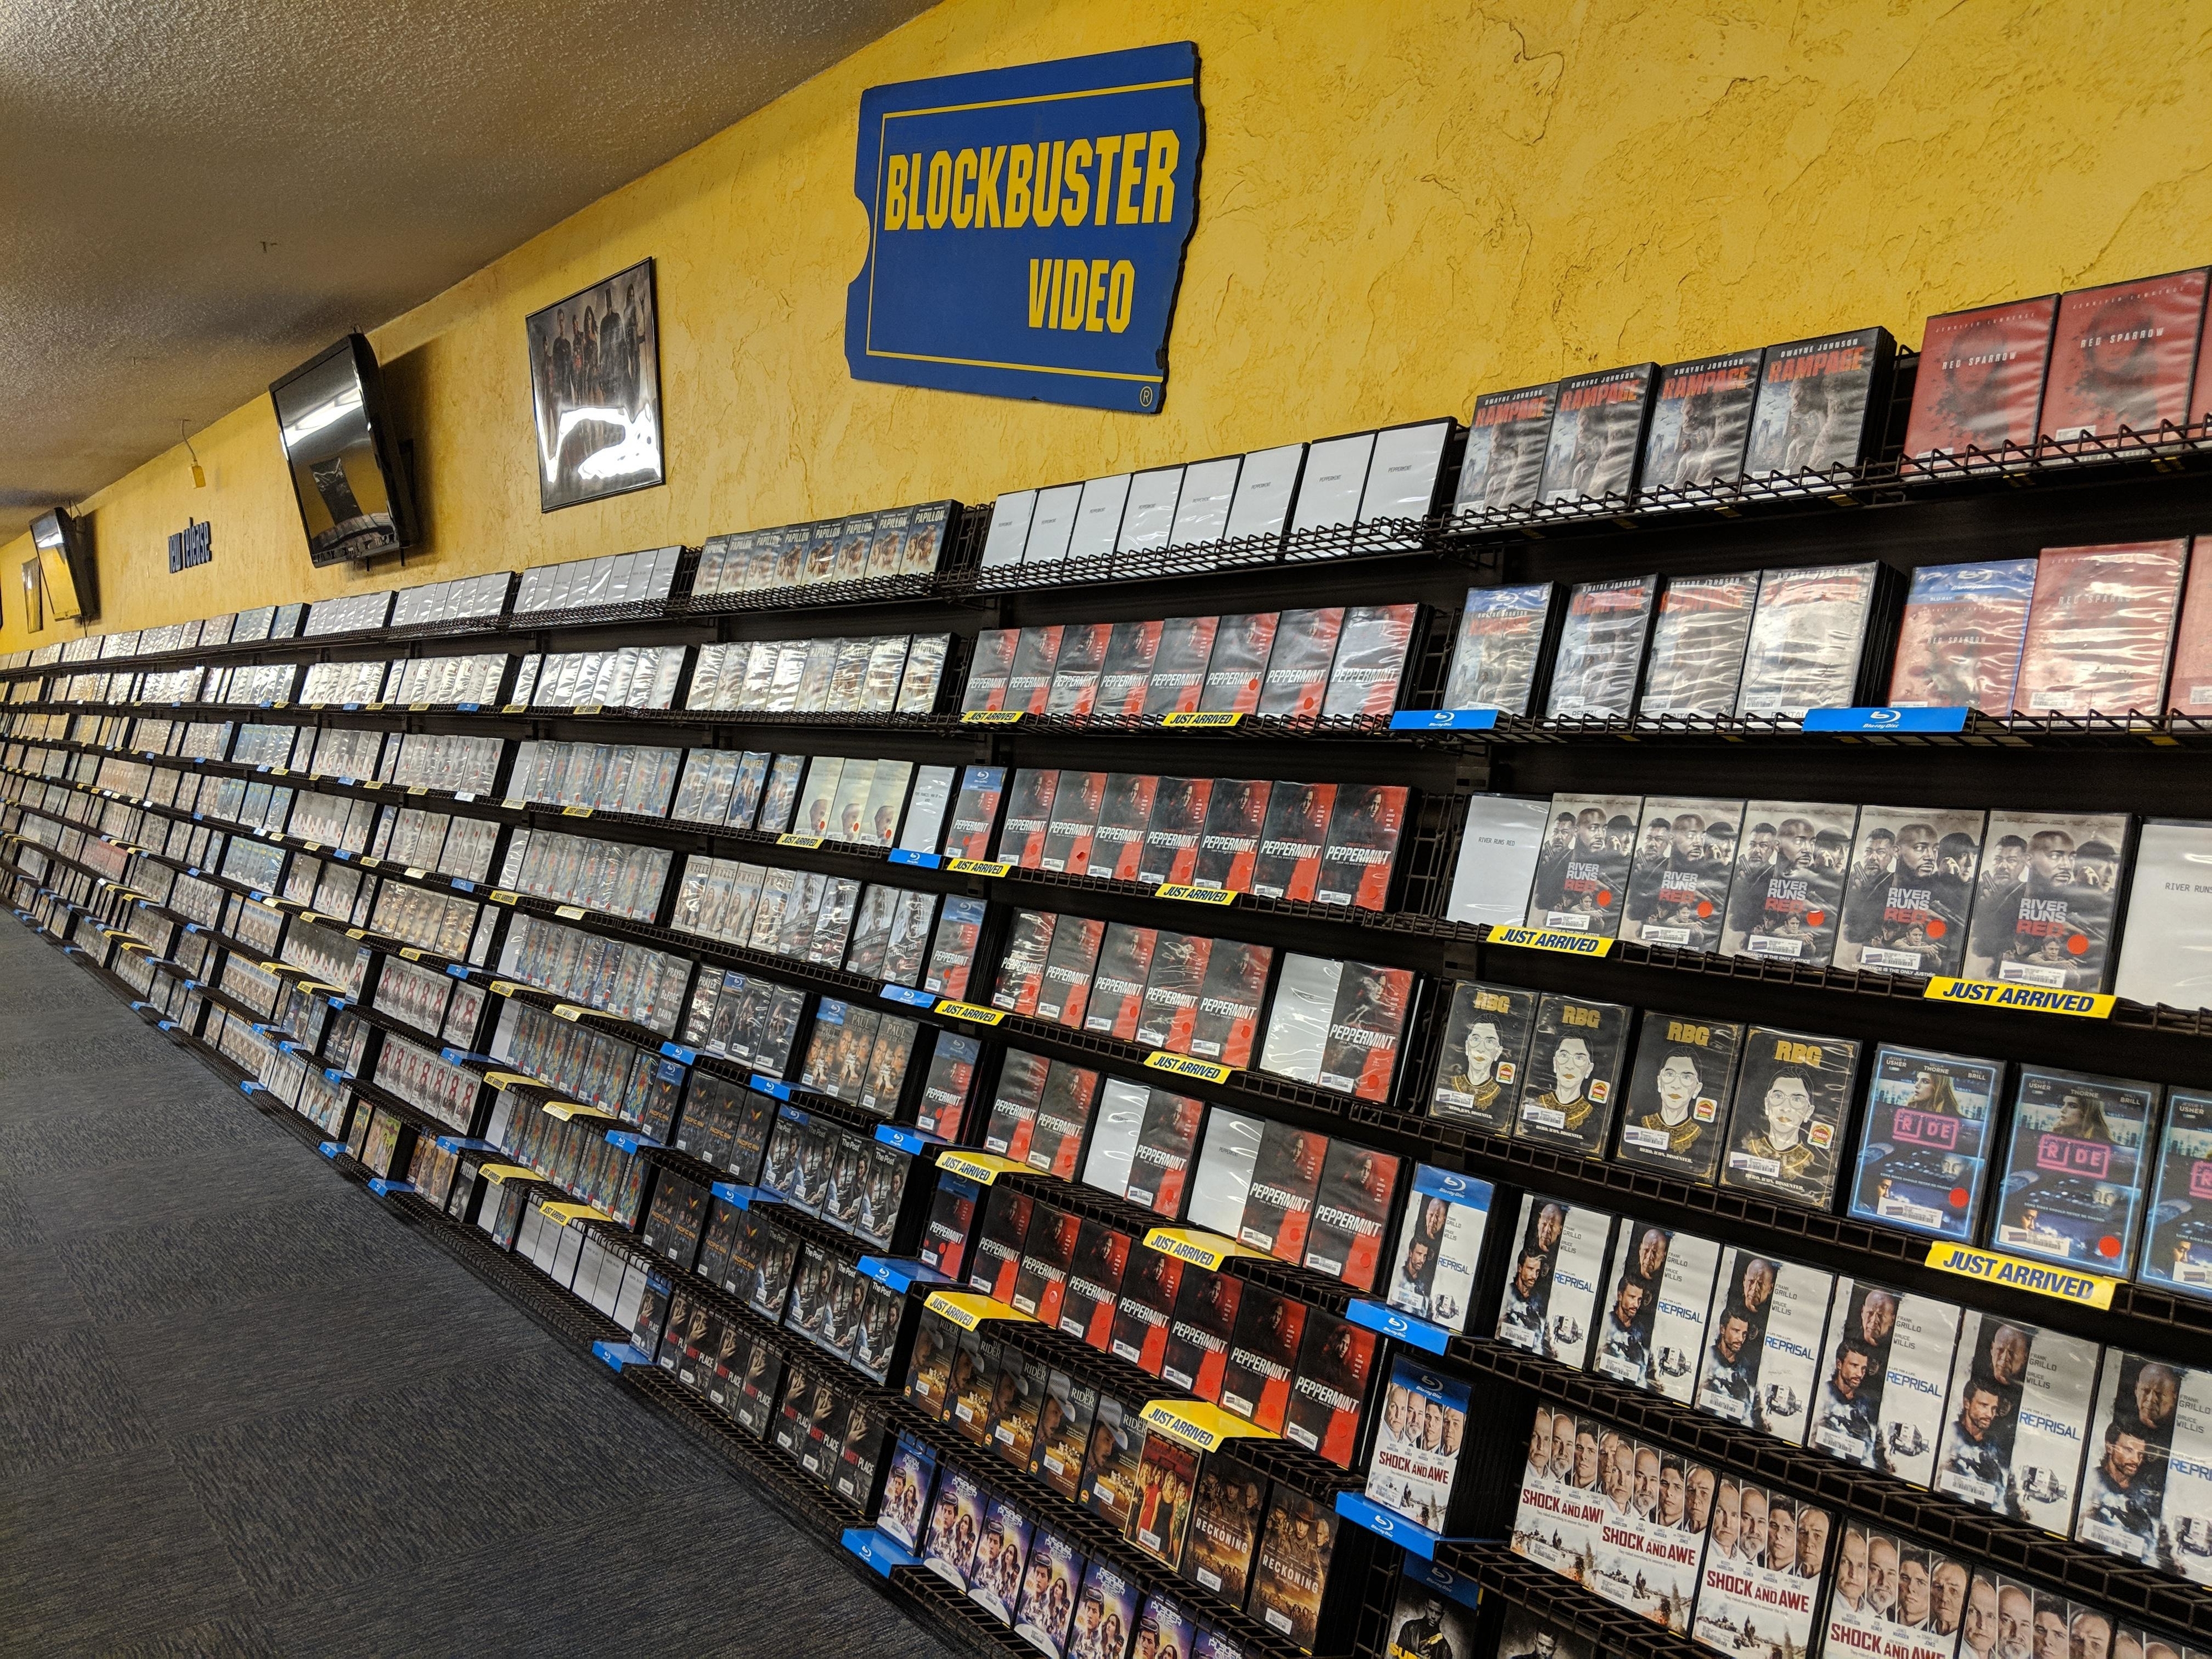 A Blockbuster Video store interior with shelves of DVDs and a distinctive sign above